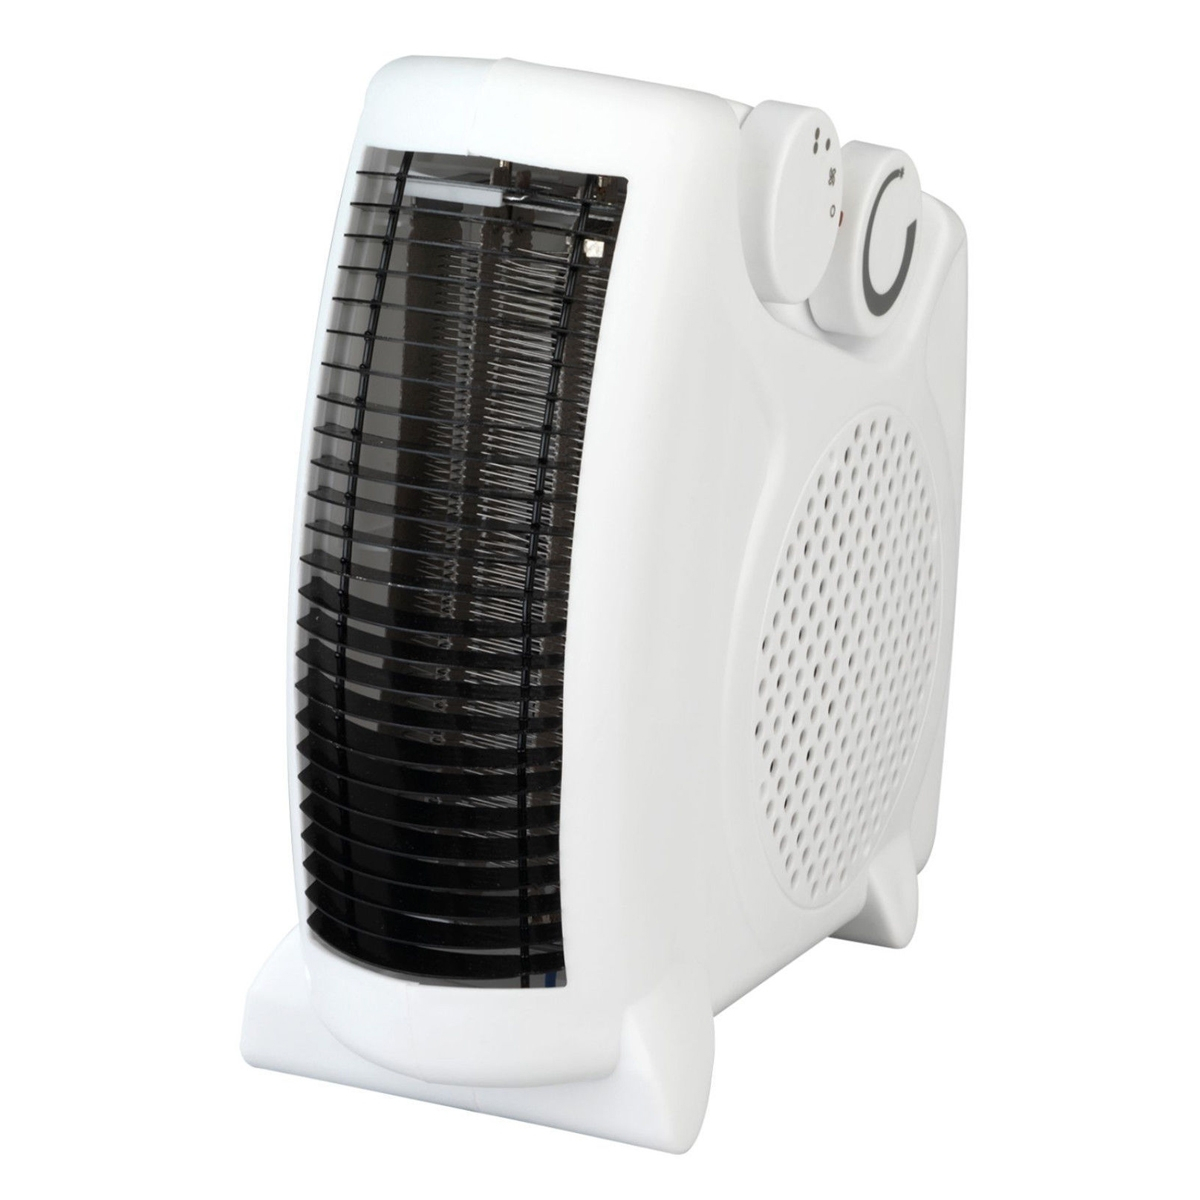 Details About Daewoo Hea1404 2000 Watts Flat Or Upright Portable Electric Fan Heater White pertaining to size 1200 X 1200